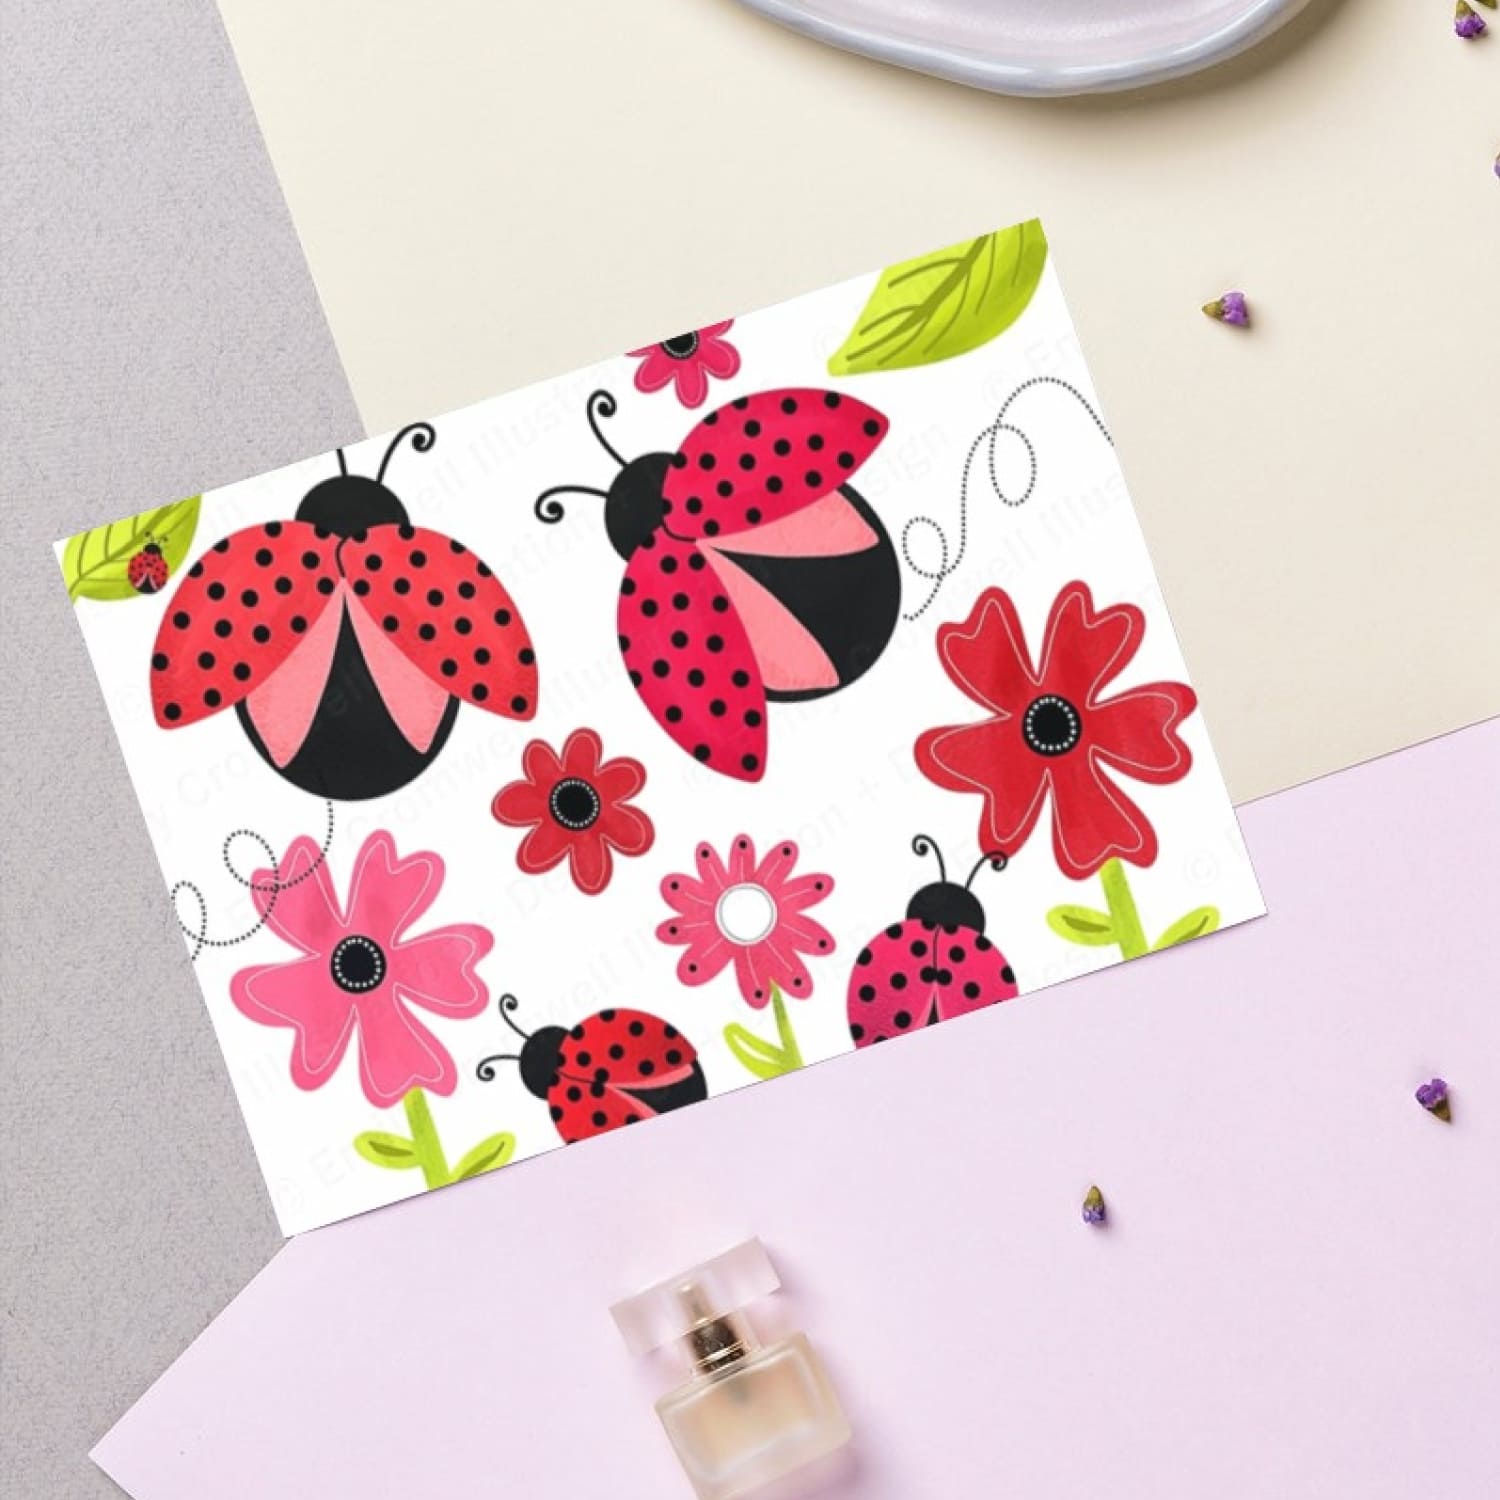 Ladybug clipart Created By Emily Cromwell Designs.